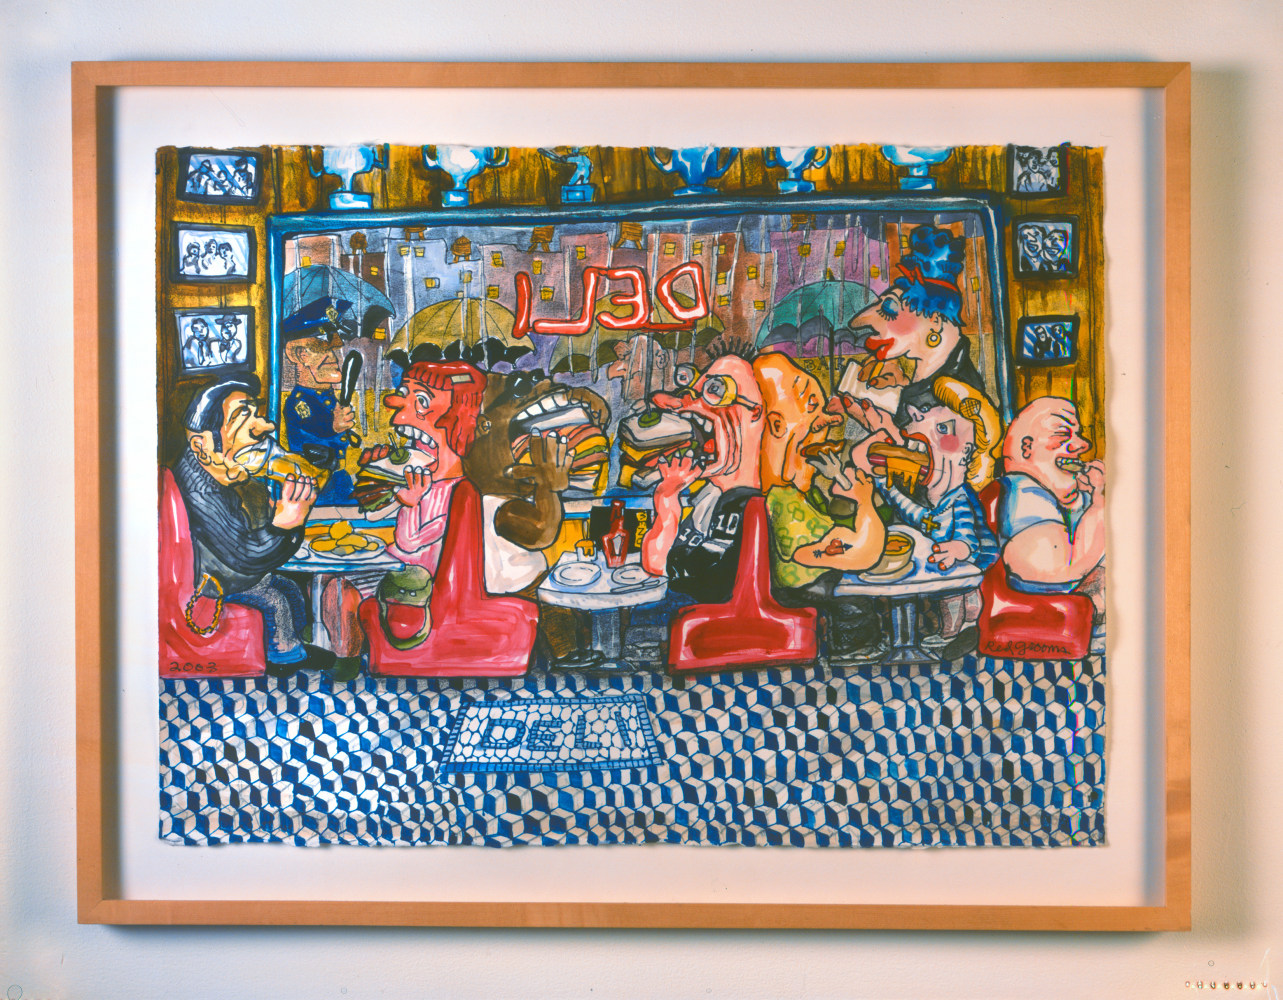 An artwork by Red Grooms depicting exaggerated depictions of customers eating sandwiches at a deli.